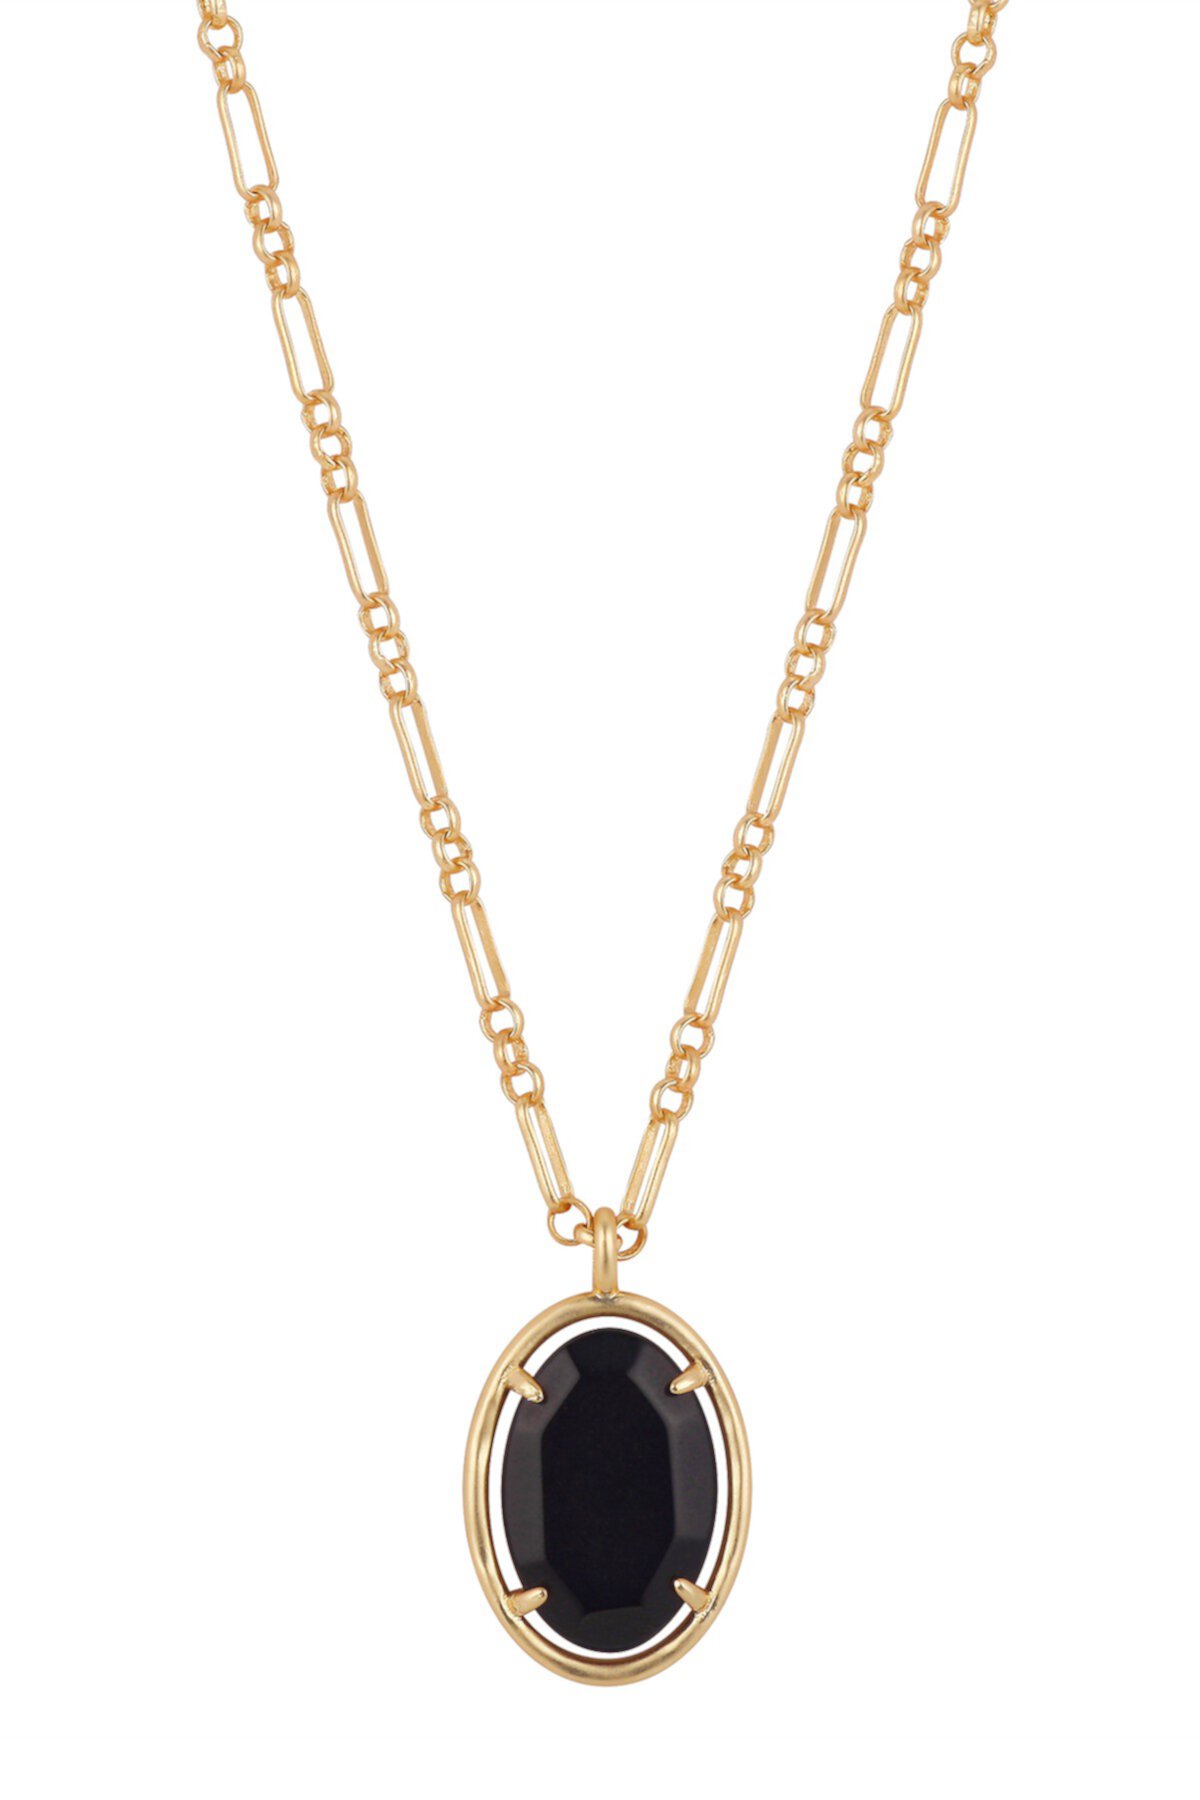 Black Agate Oval Stone Necklace with Paperlink Chain LA Rocks